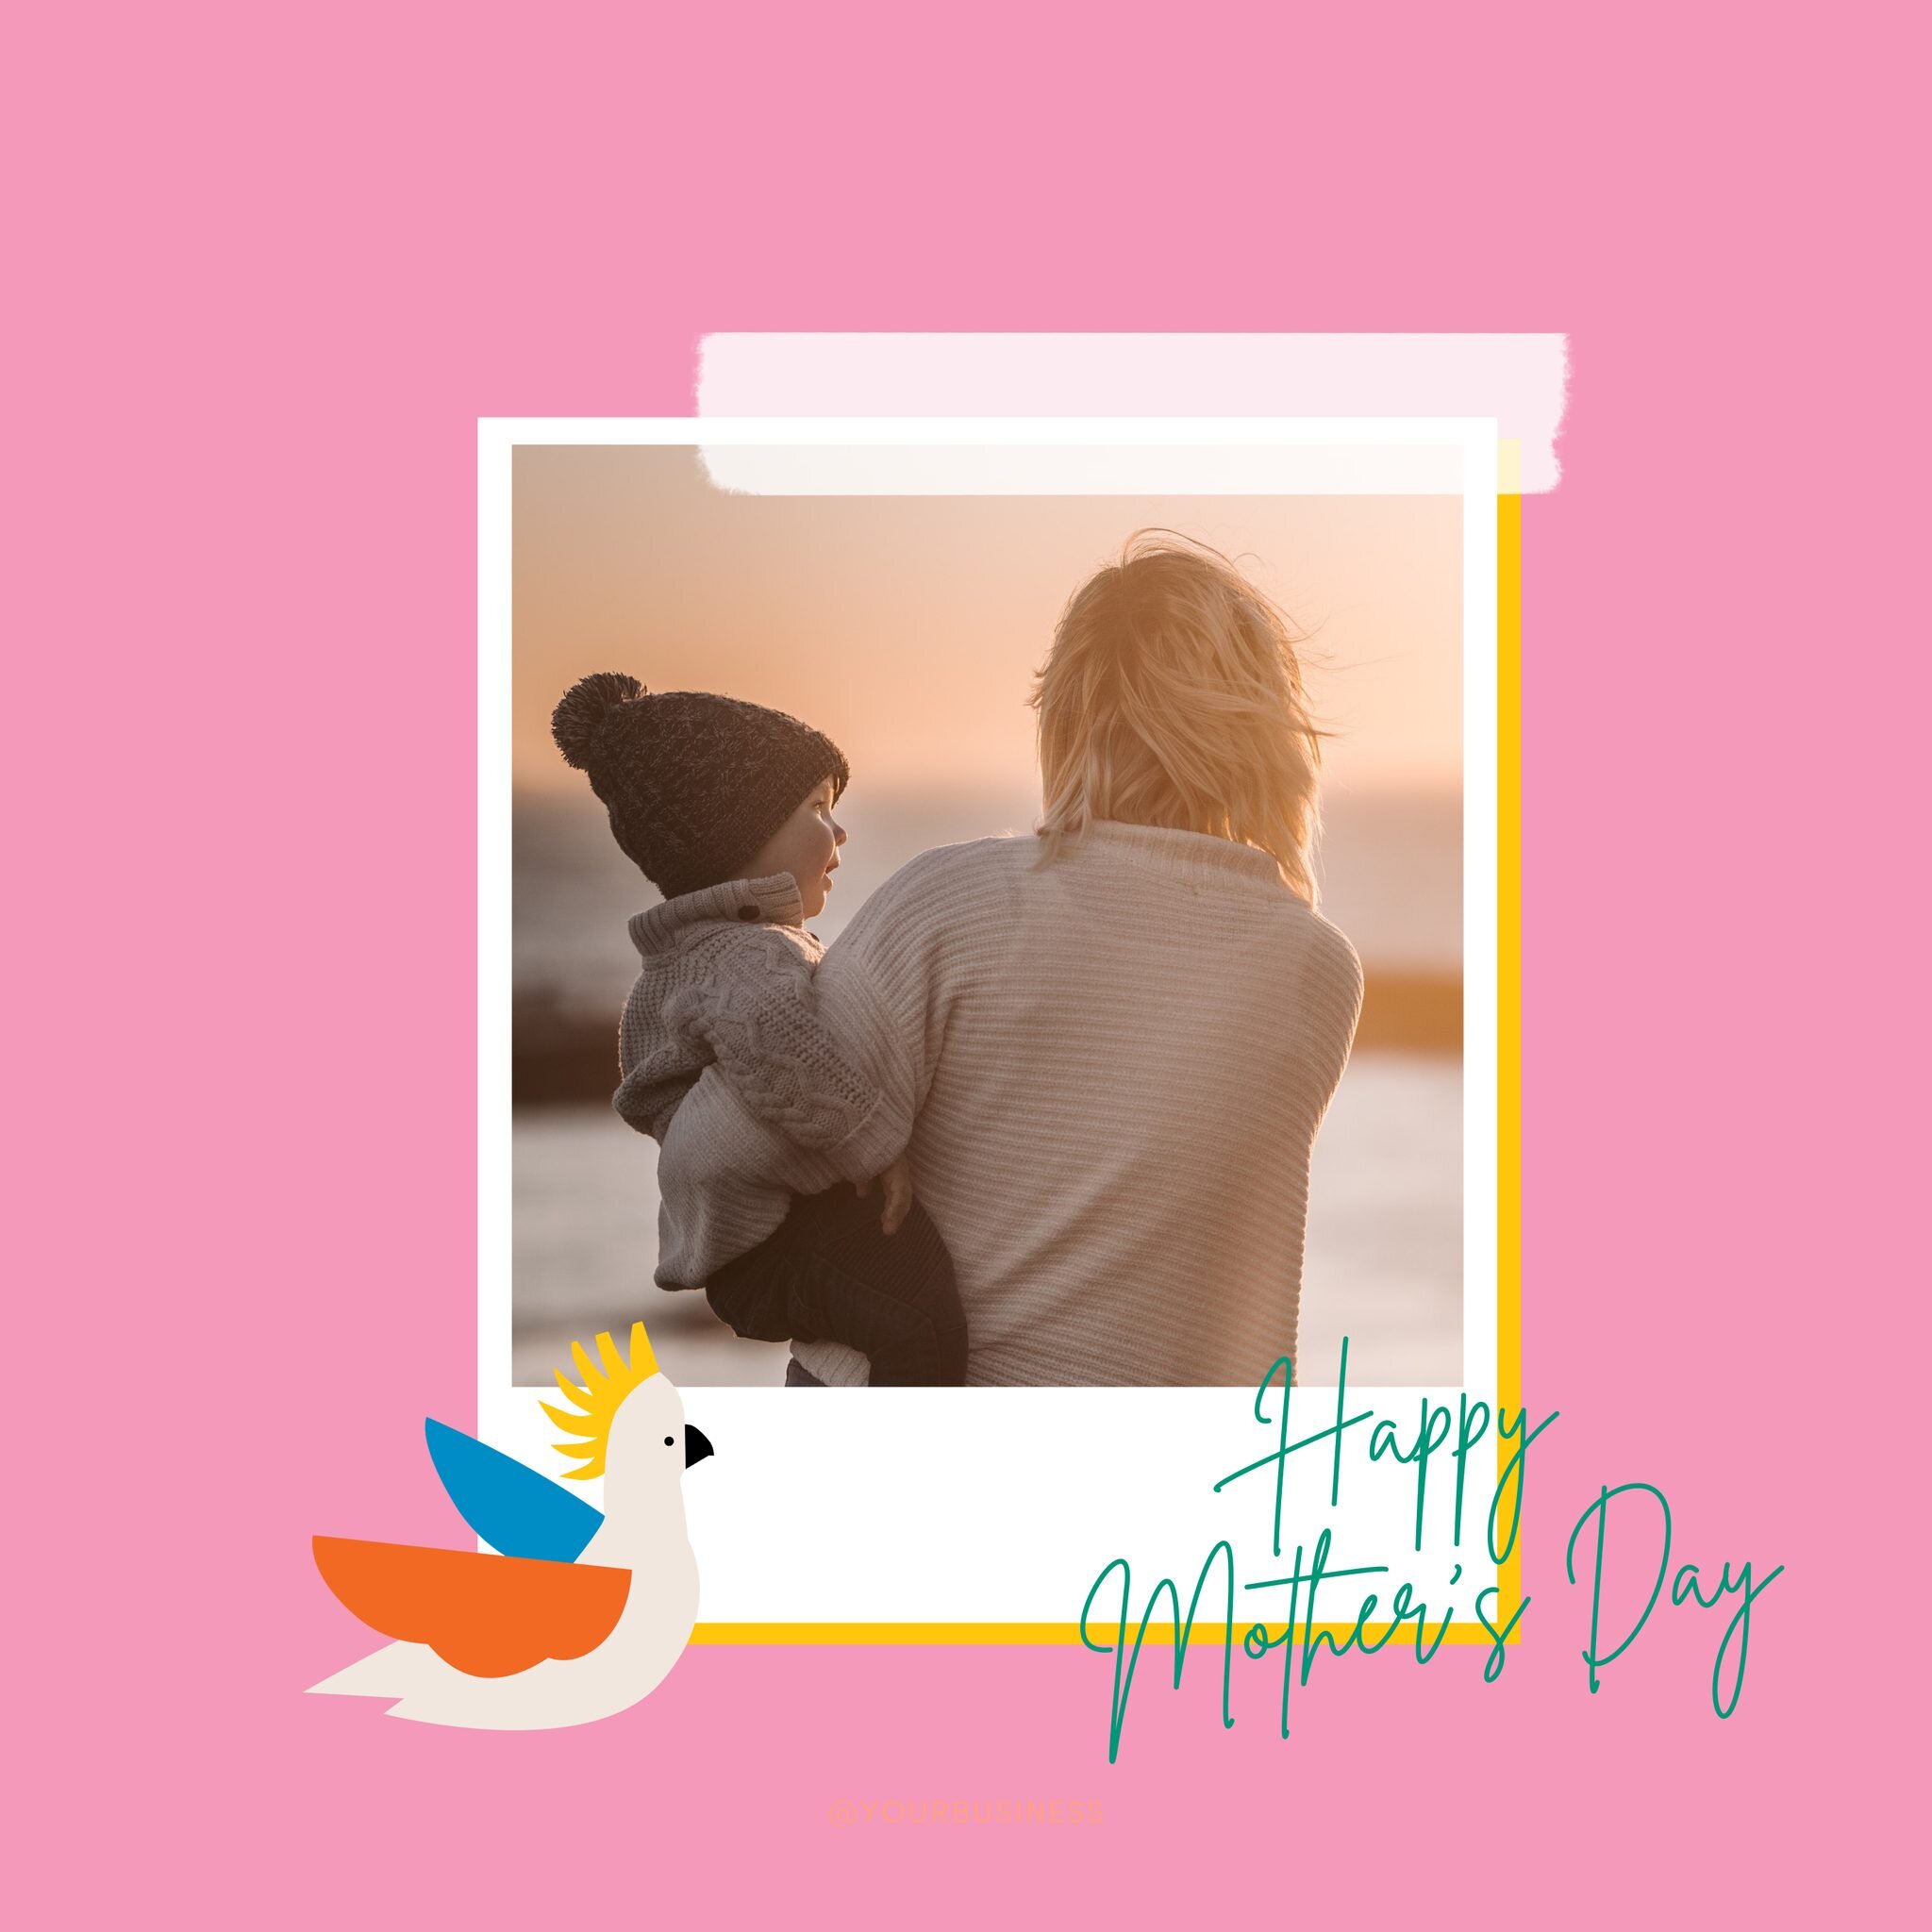 To all the beautiful Mums, Stepmums, Aunties, Grandmothers, Godmothers, and brilliant women who make up our PLAY community &ndash; we hope you&rsquo;re having a wonderful day today!

#mothersday #mothers #play #playchildcare #playchildcare&amp;kinder